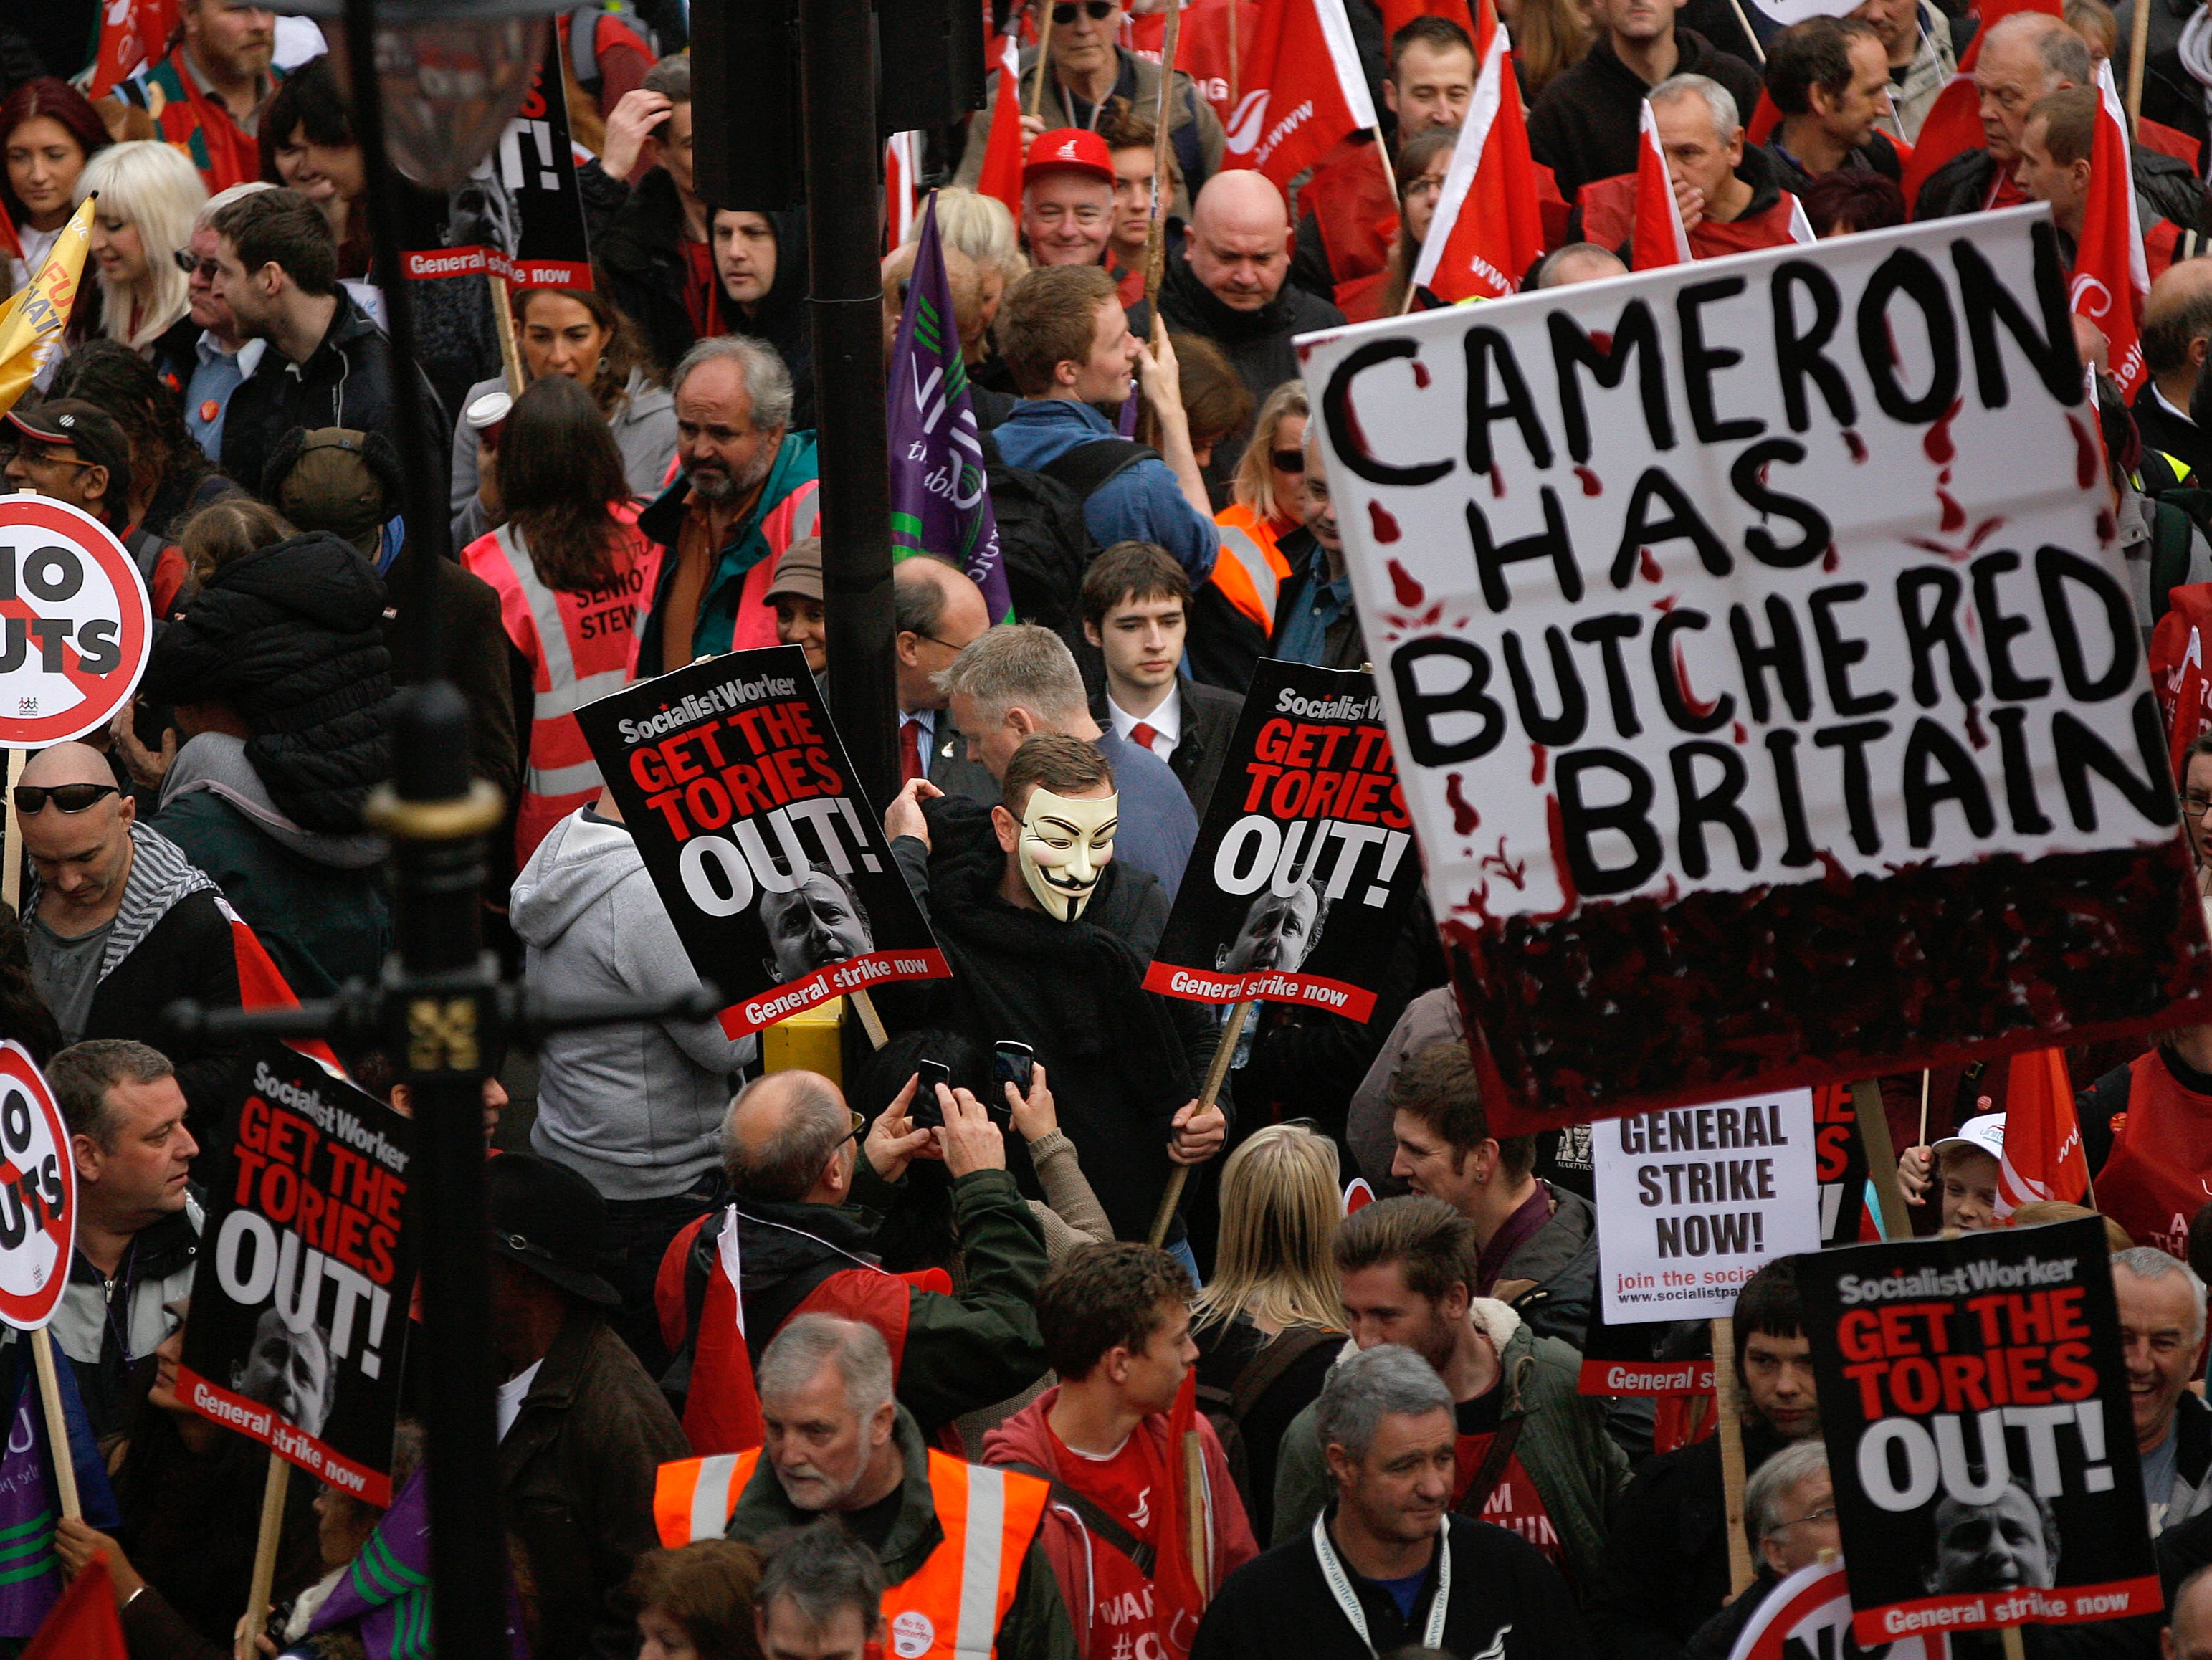 Demonstrators in London take part in a TUC march in protest against the government's austerity measures in 2012